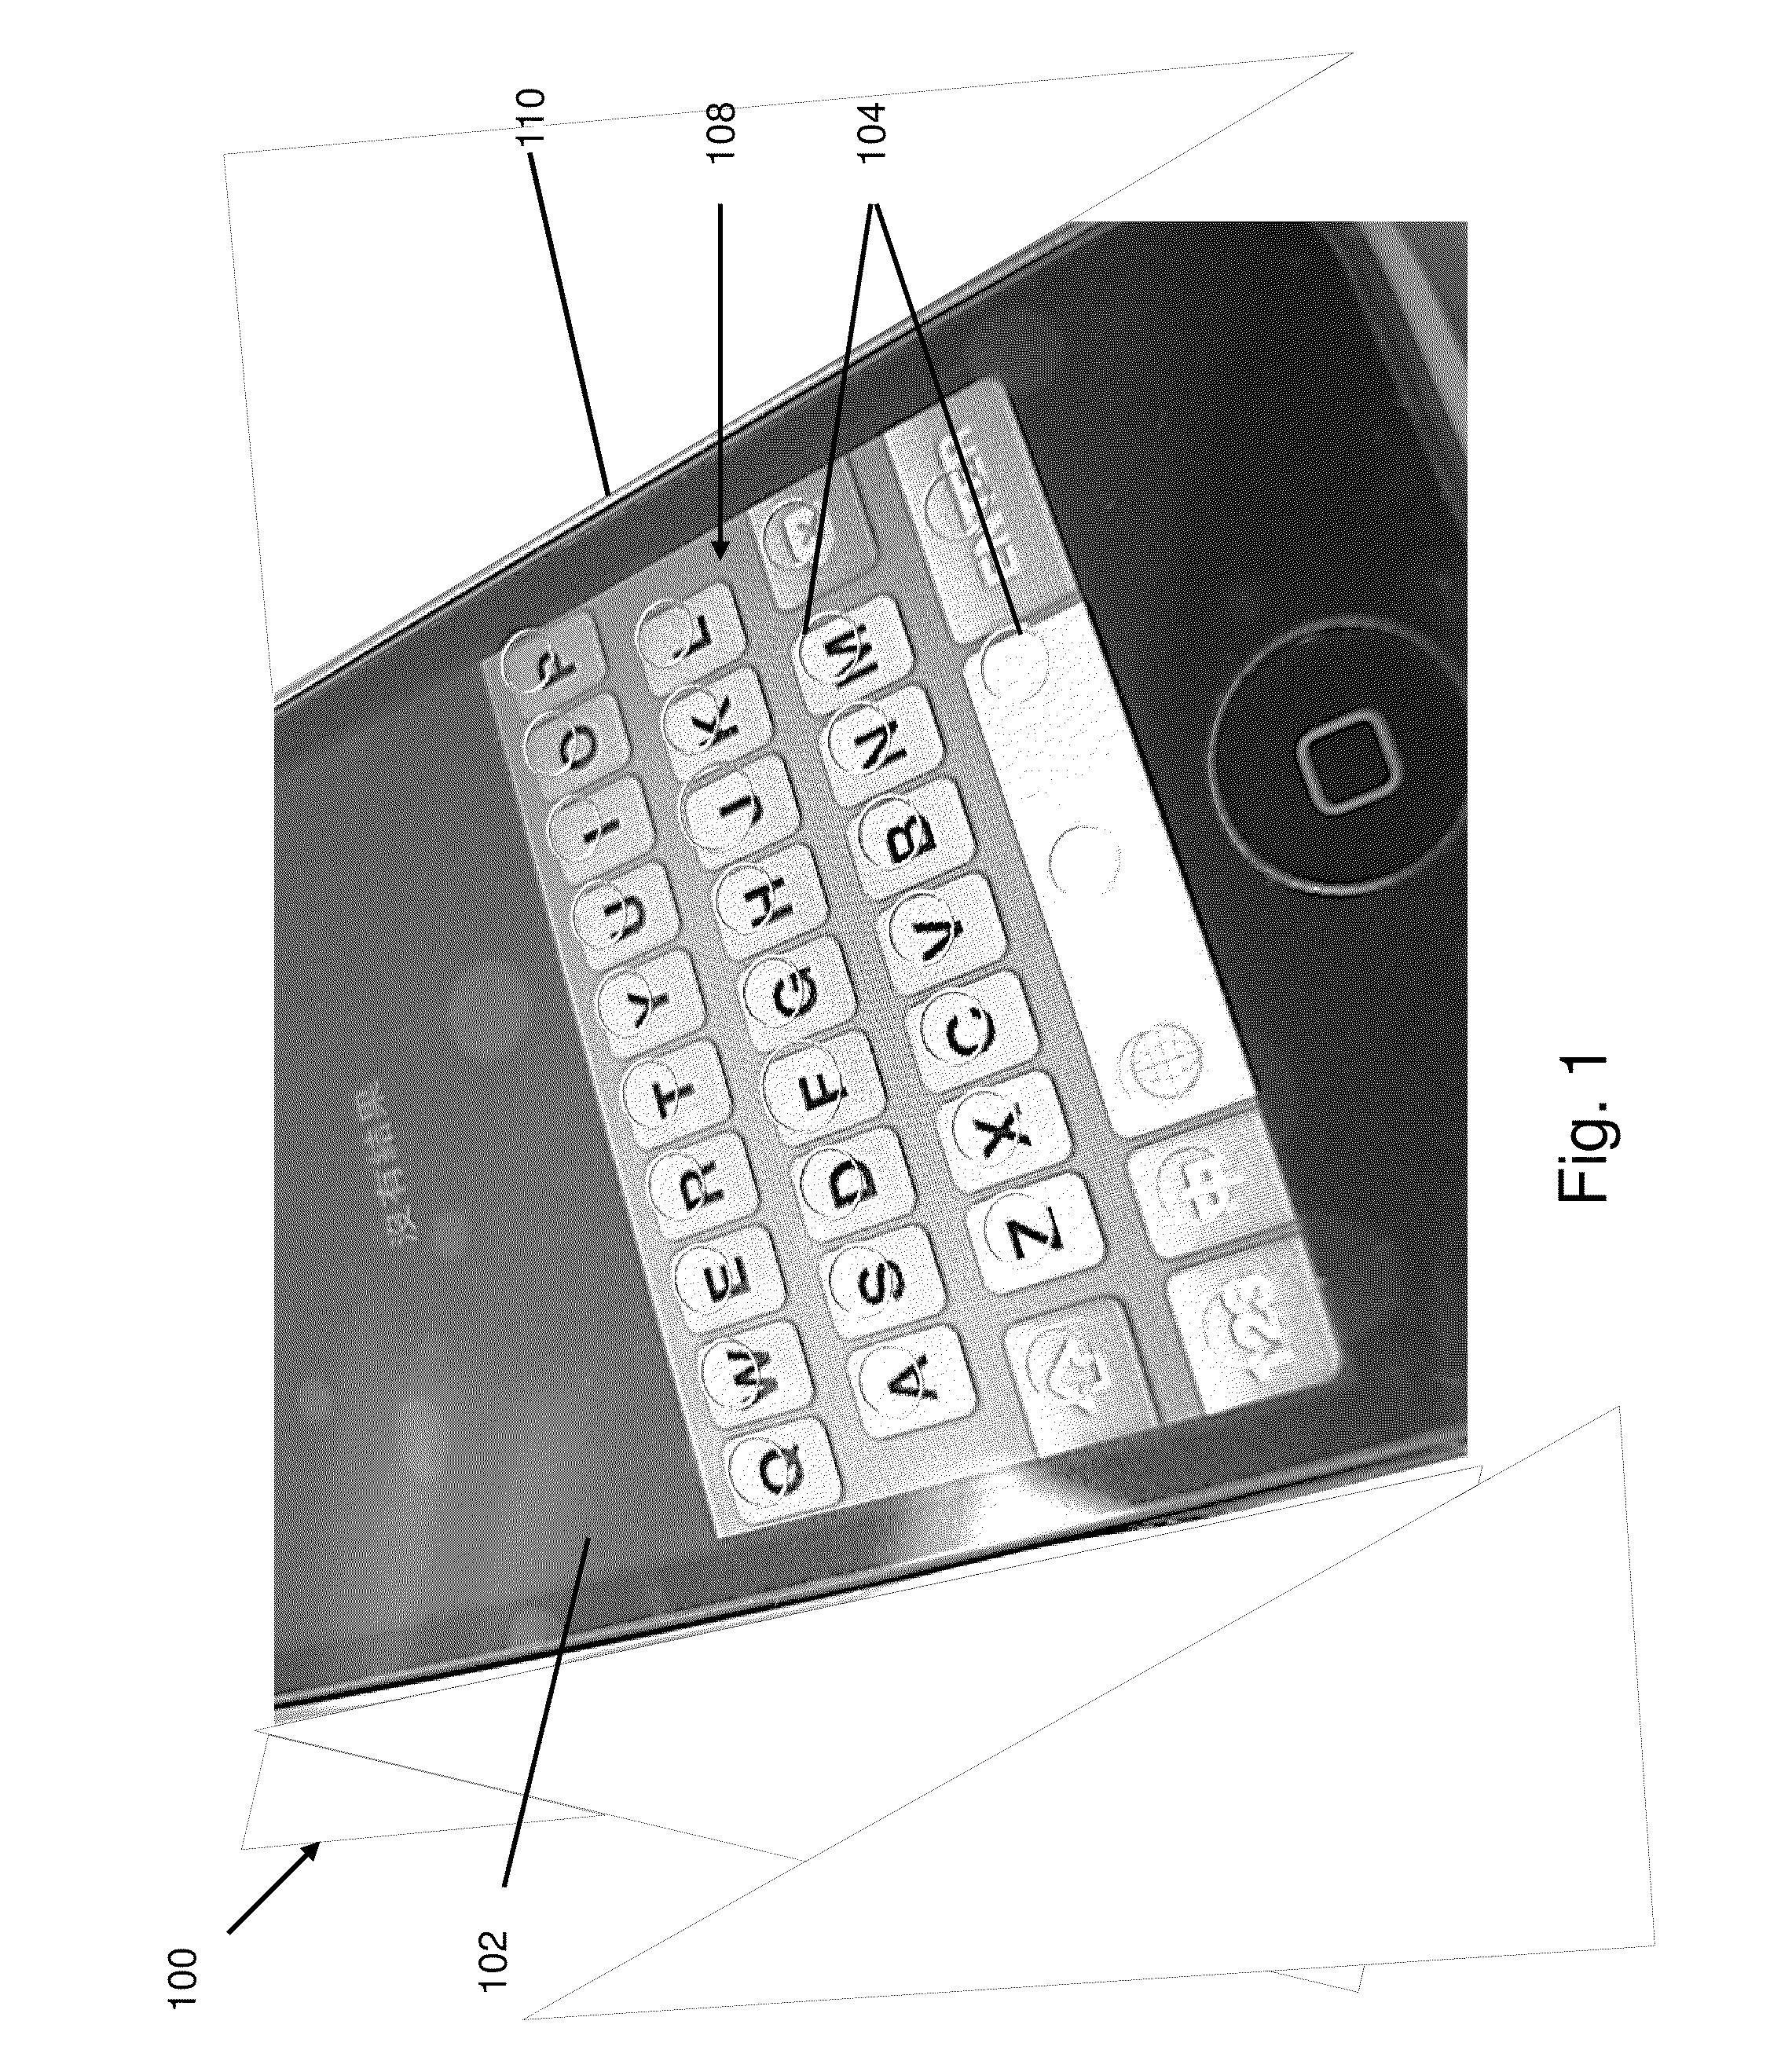 Touch screen overlay for mobile devices to facilitate accuracy and speed of data entry